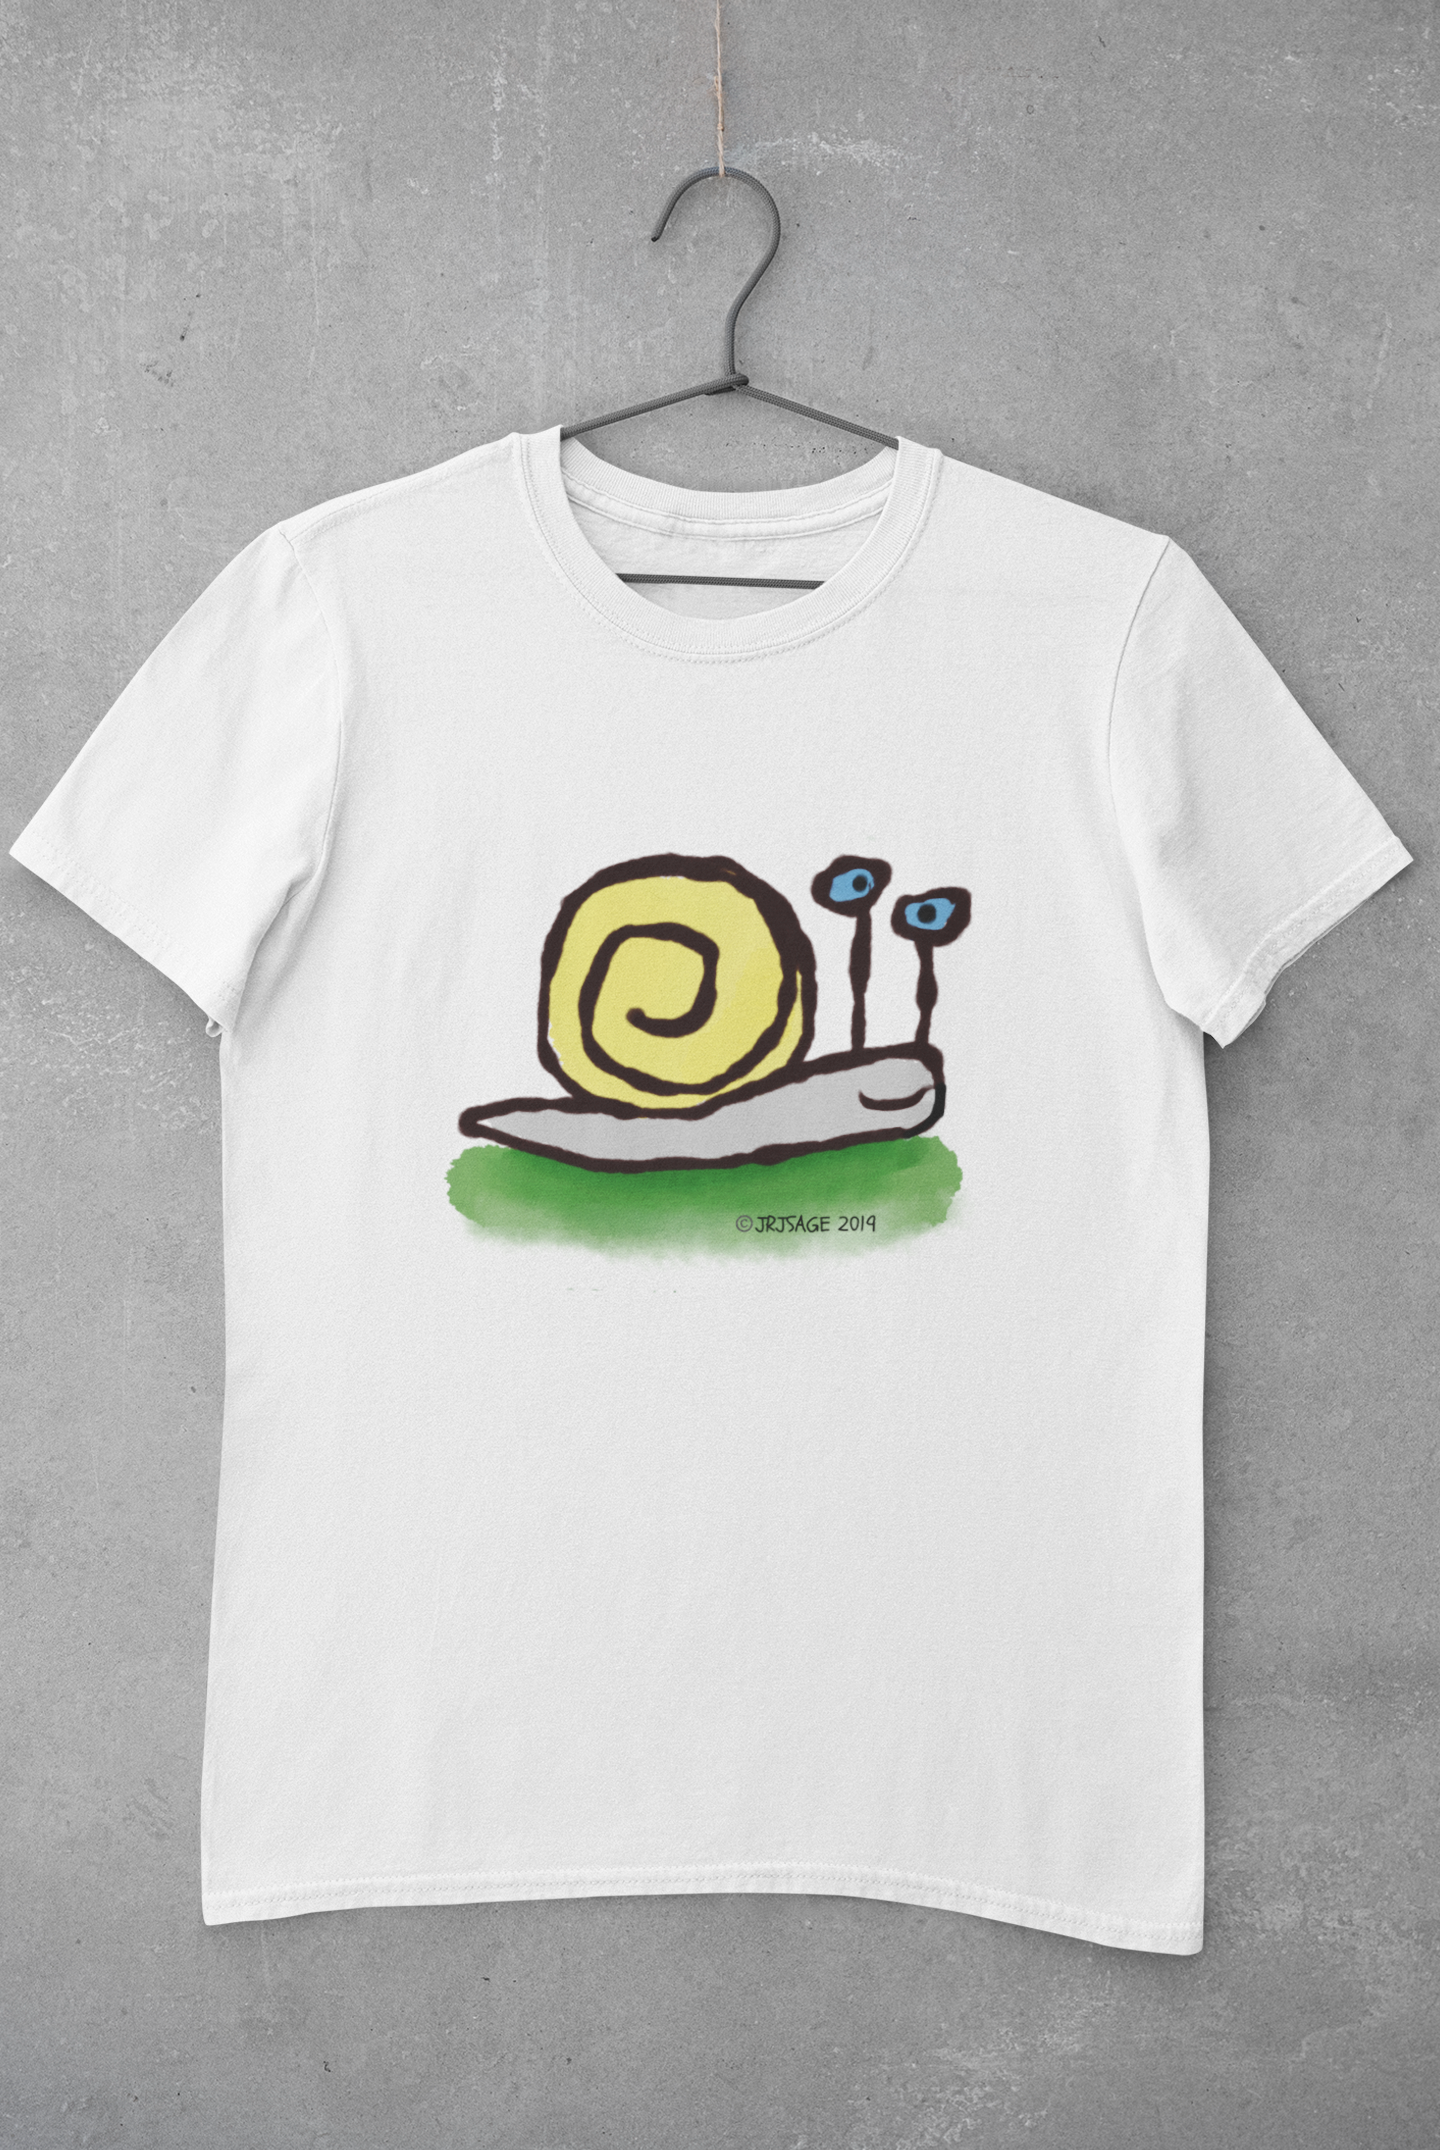 Snail T-shirt - A White Unisex Hector and Bone vegan cotton T-shirt with printed Cute Snail illustration